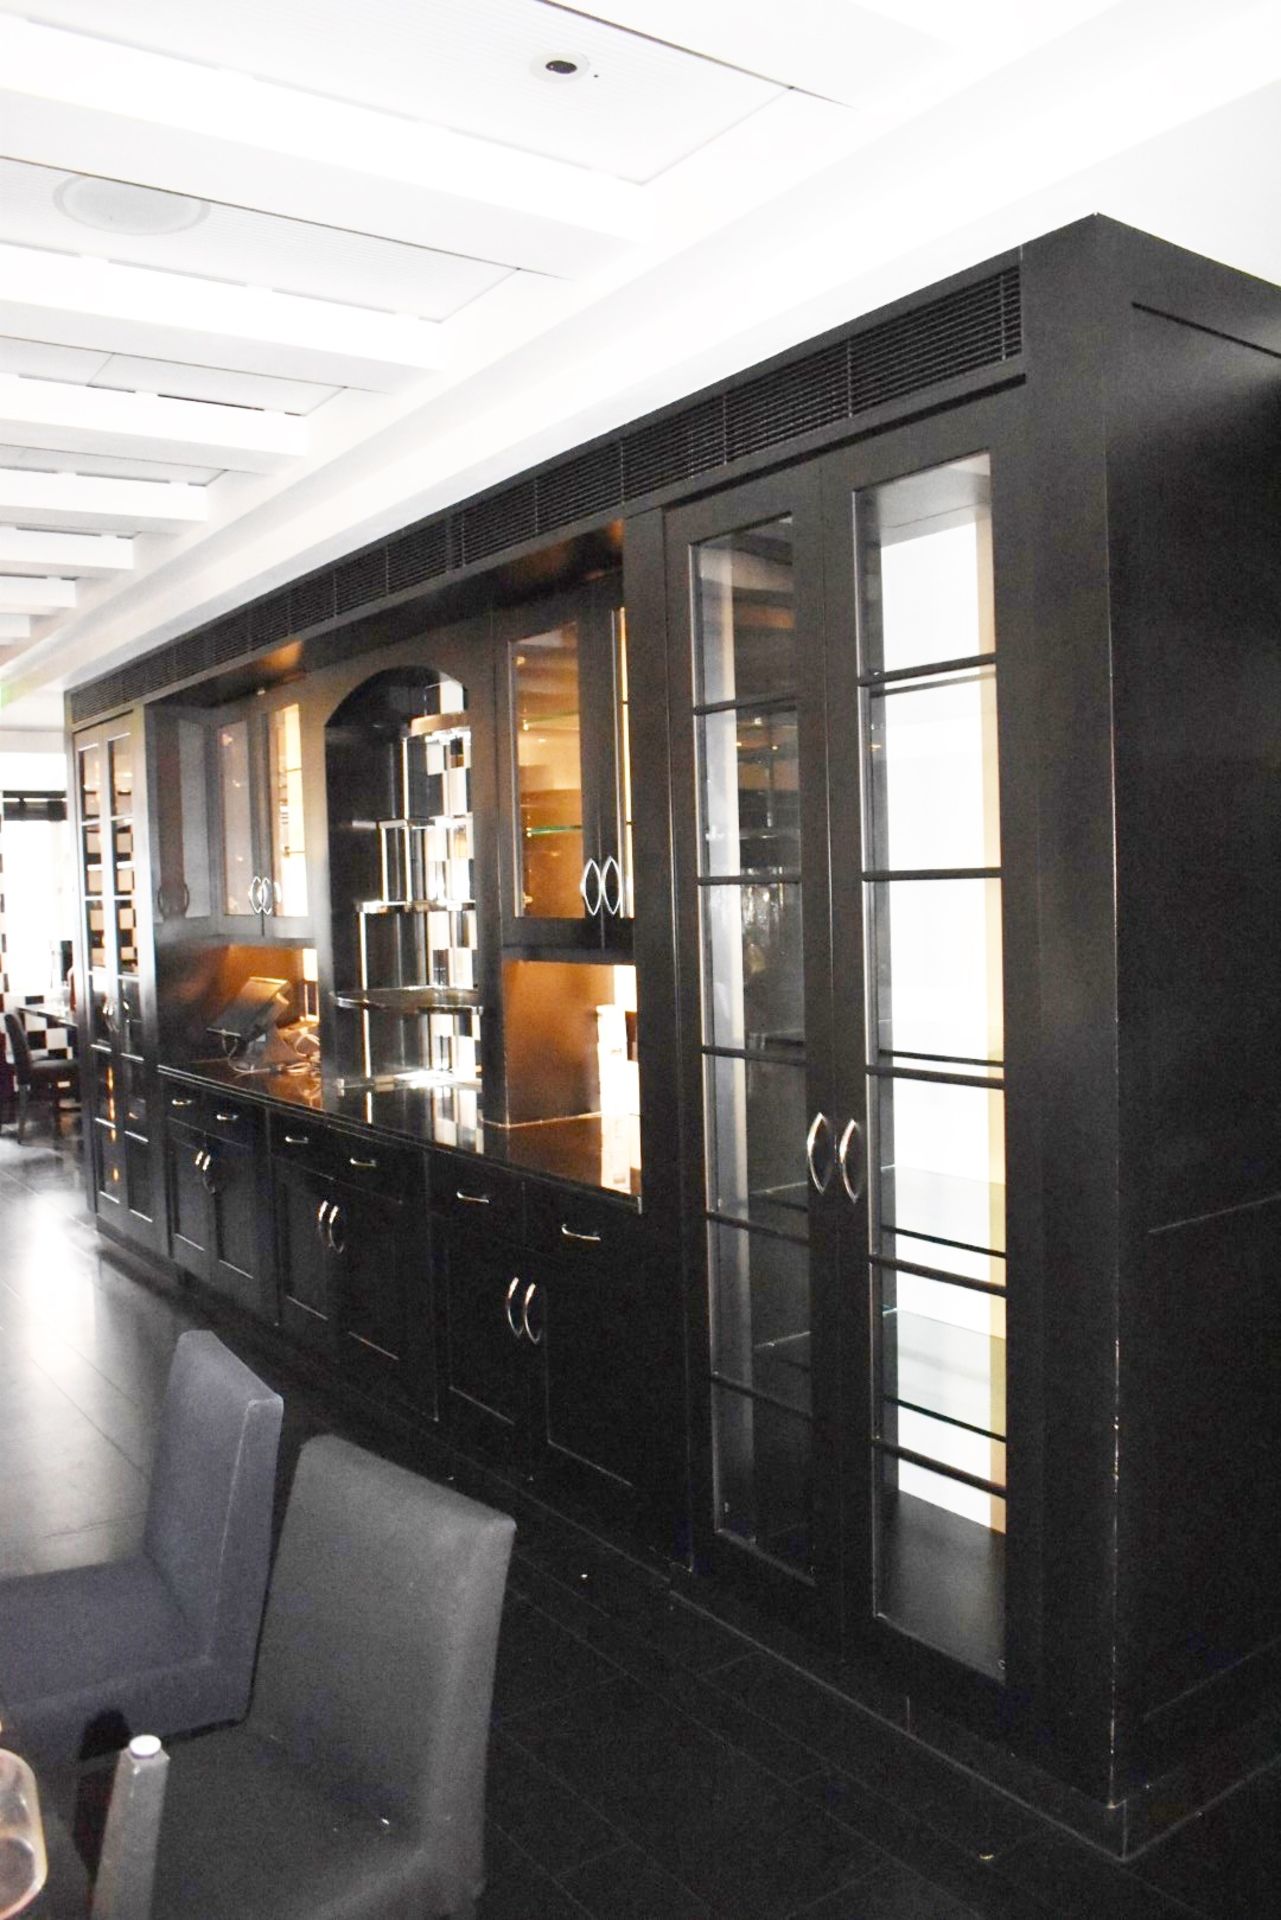 1 x Large Wall Dresser / Server Cabinet in Black - Features Epos Stations, Display Cabinets, Storage - Image 4 of 7